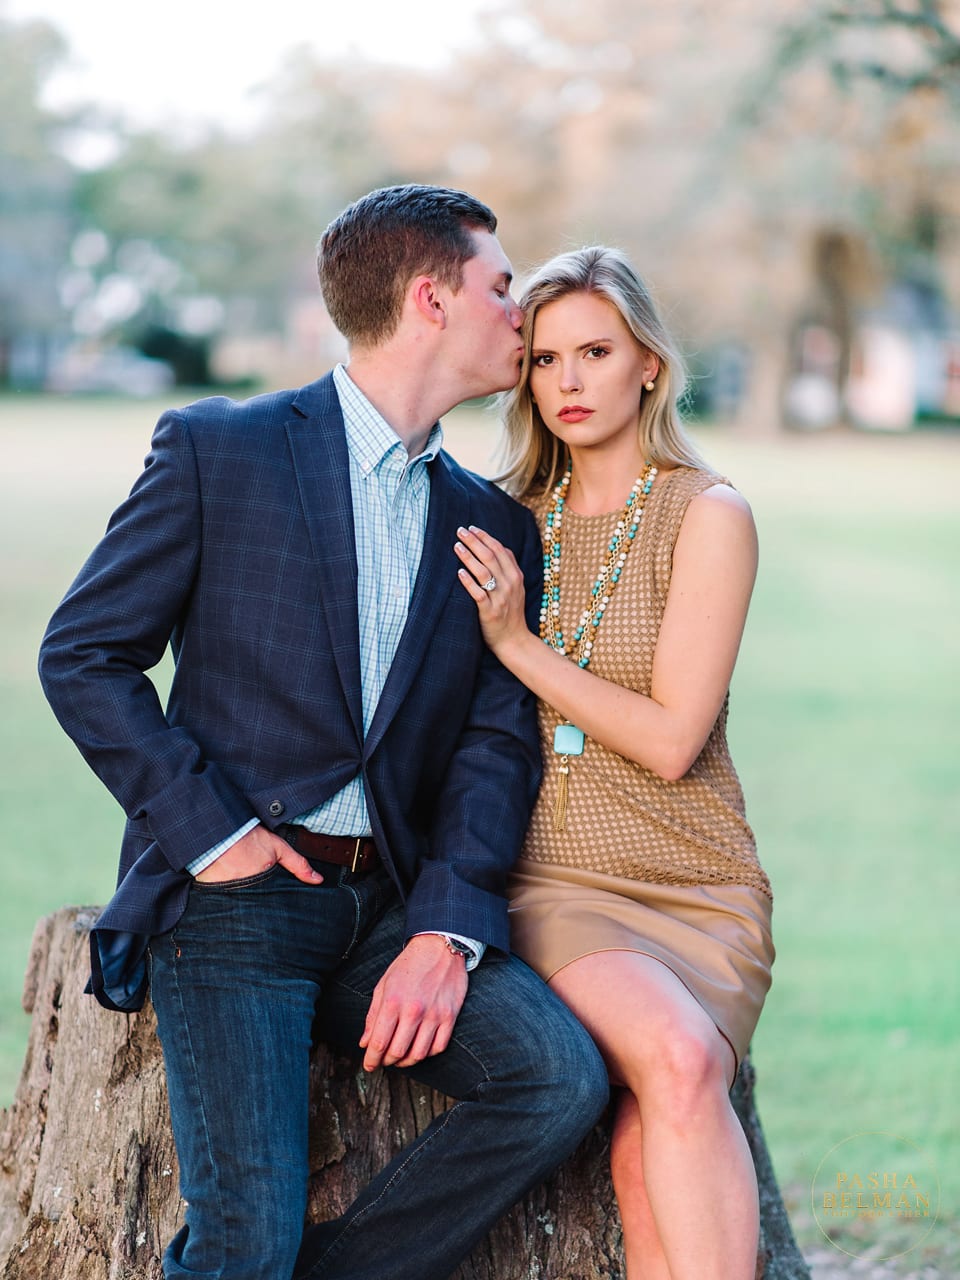 Mansfield Plantation Engagement Pictures | Charleston Engagement Photography and Ideas for Engaged Couples